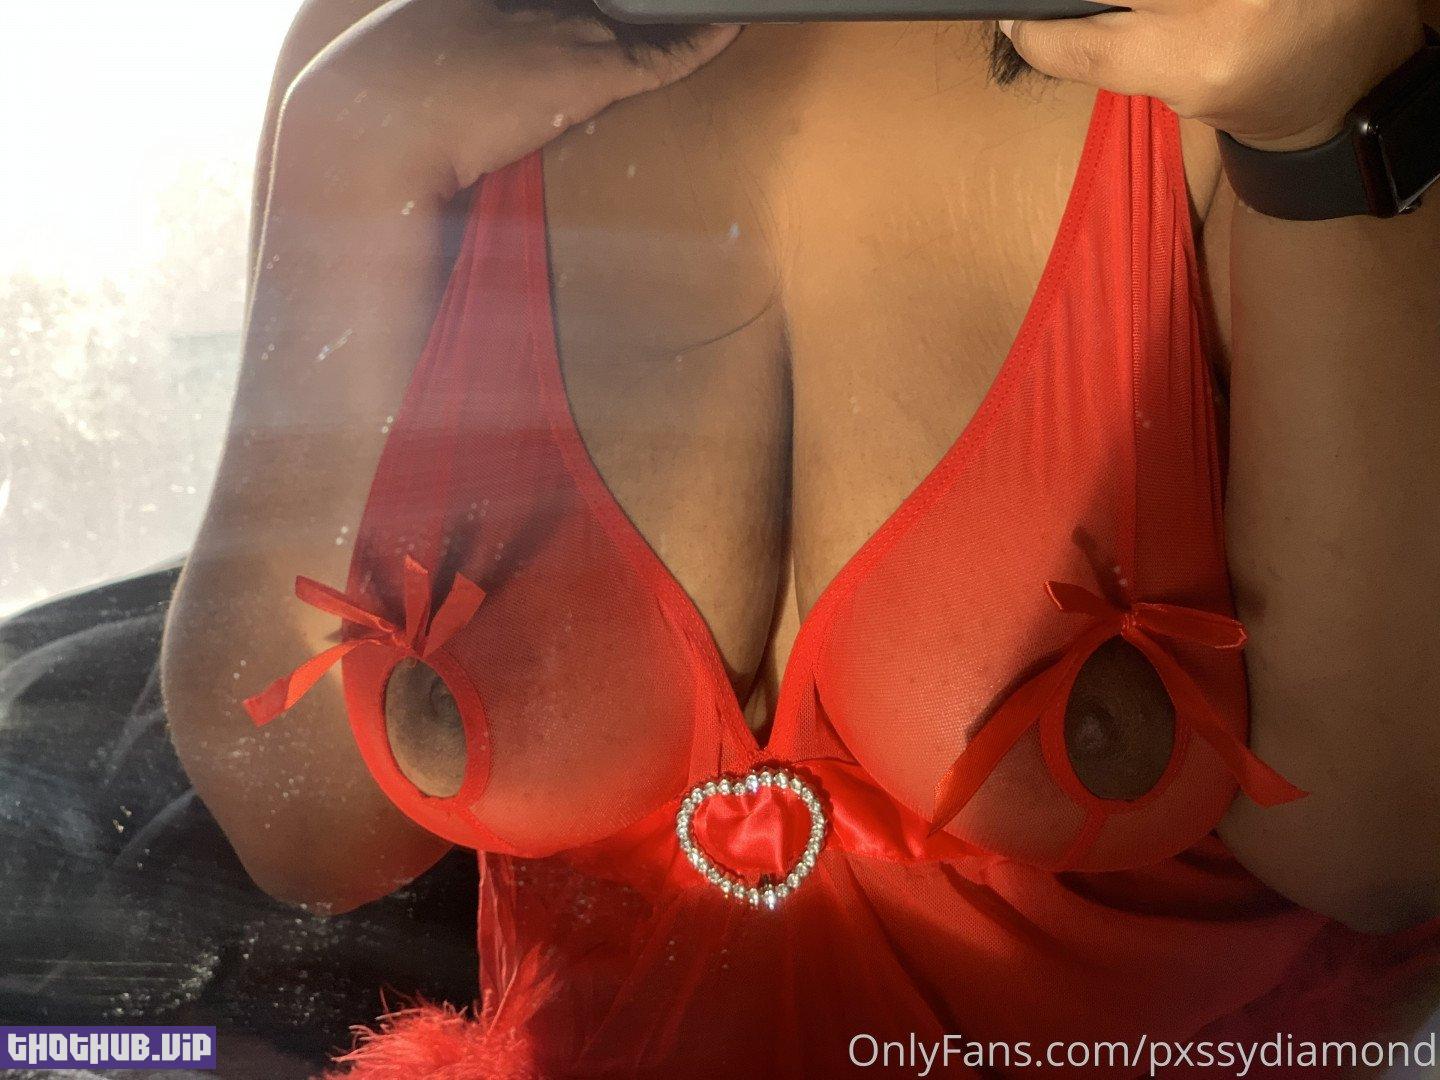  (pxssydiamond) Onlyfans Leaks (144 images)